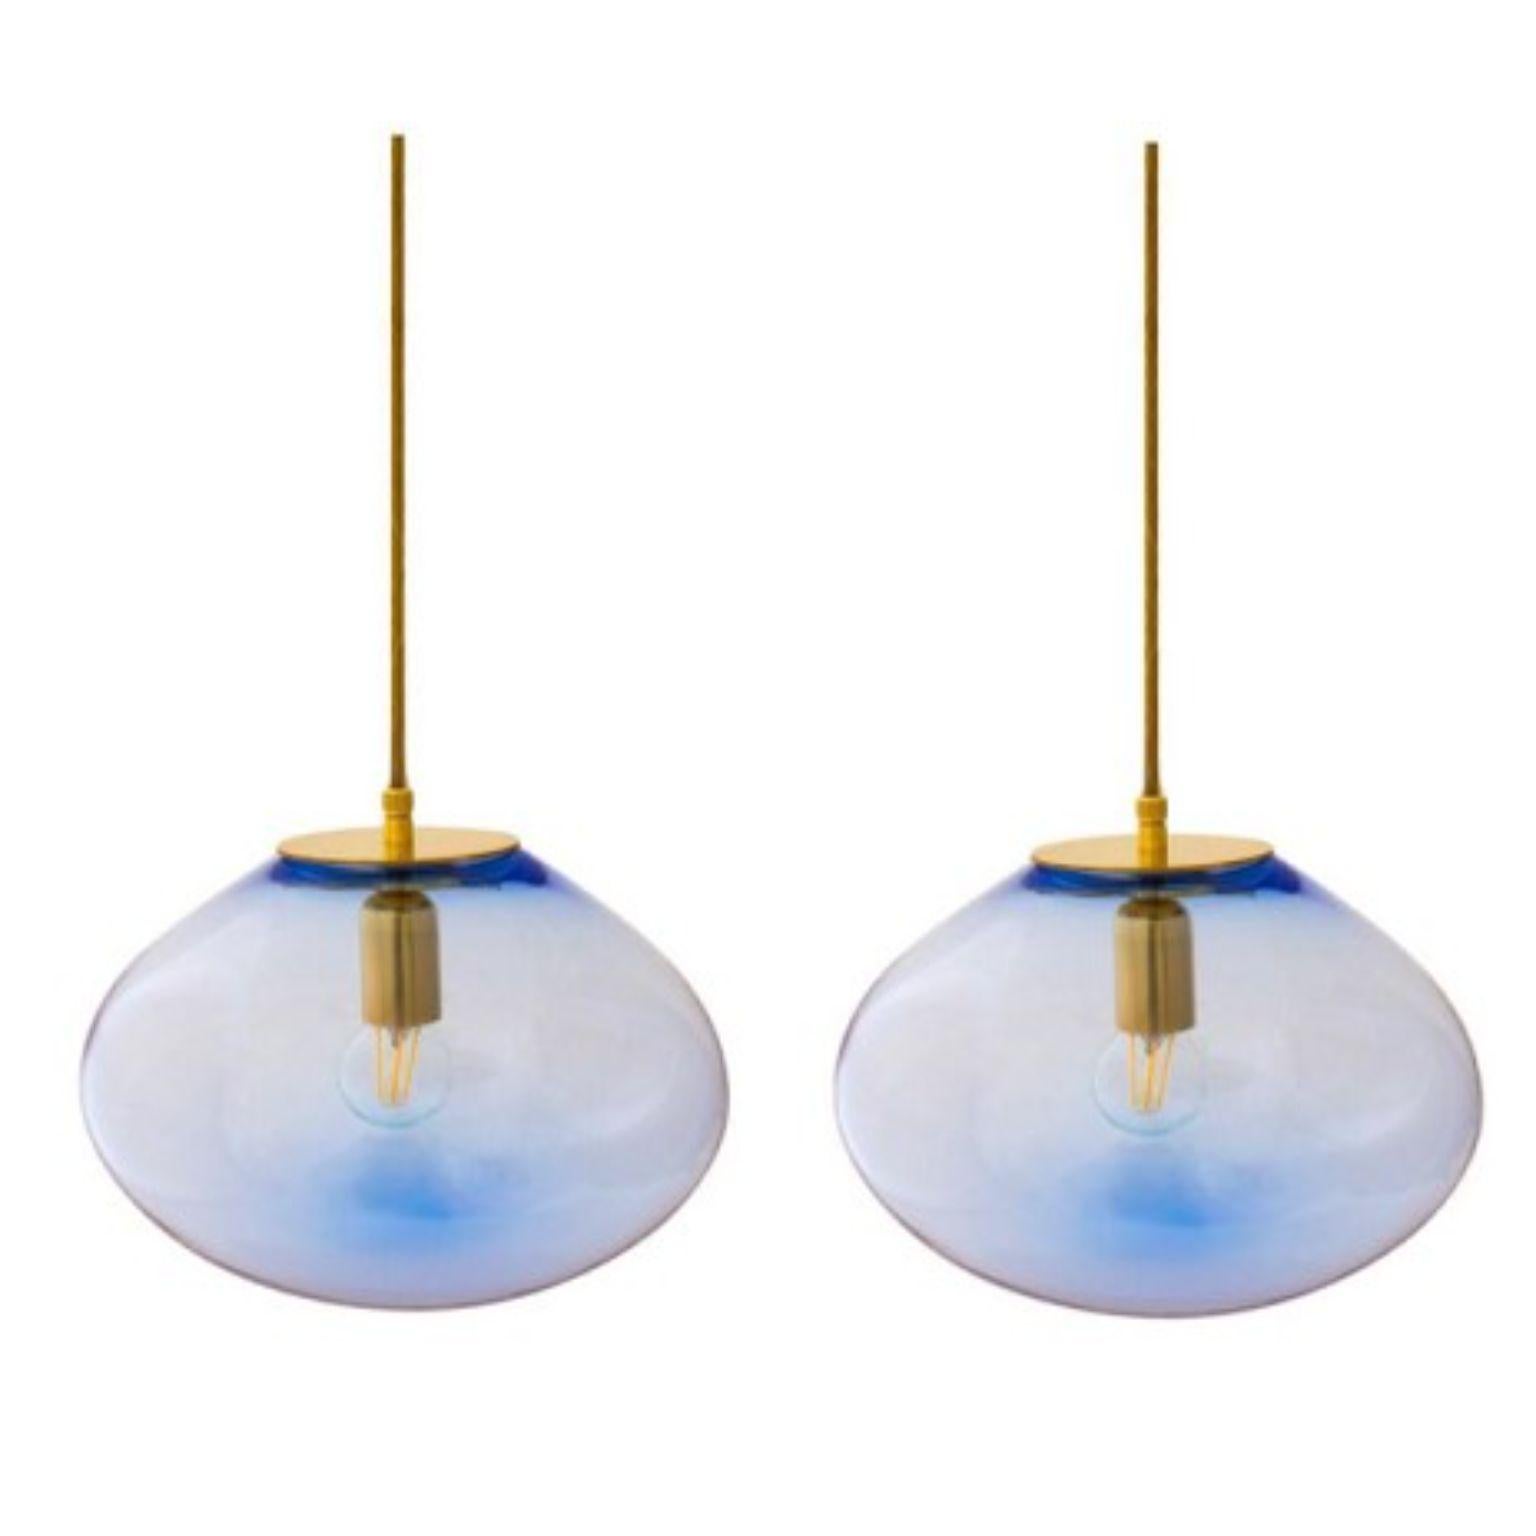 Set of 2 Planetoide vesta steel blue pendants by Eloa
No UL listed 
Material: glass, steel, silver, LED bulb
Dimensions: D30 x W30 x H250 cm
Also available in different colours and dimensions.

All our lamps can be wired according to each country.